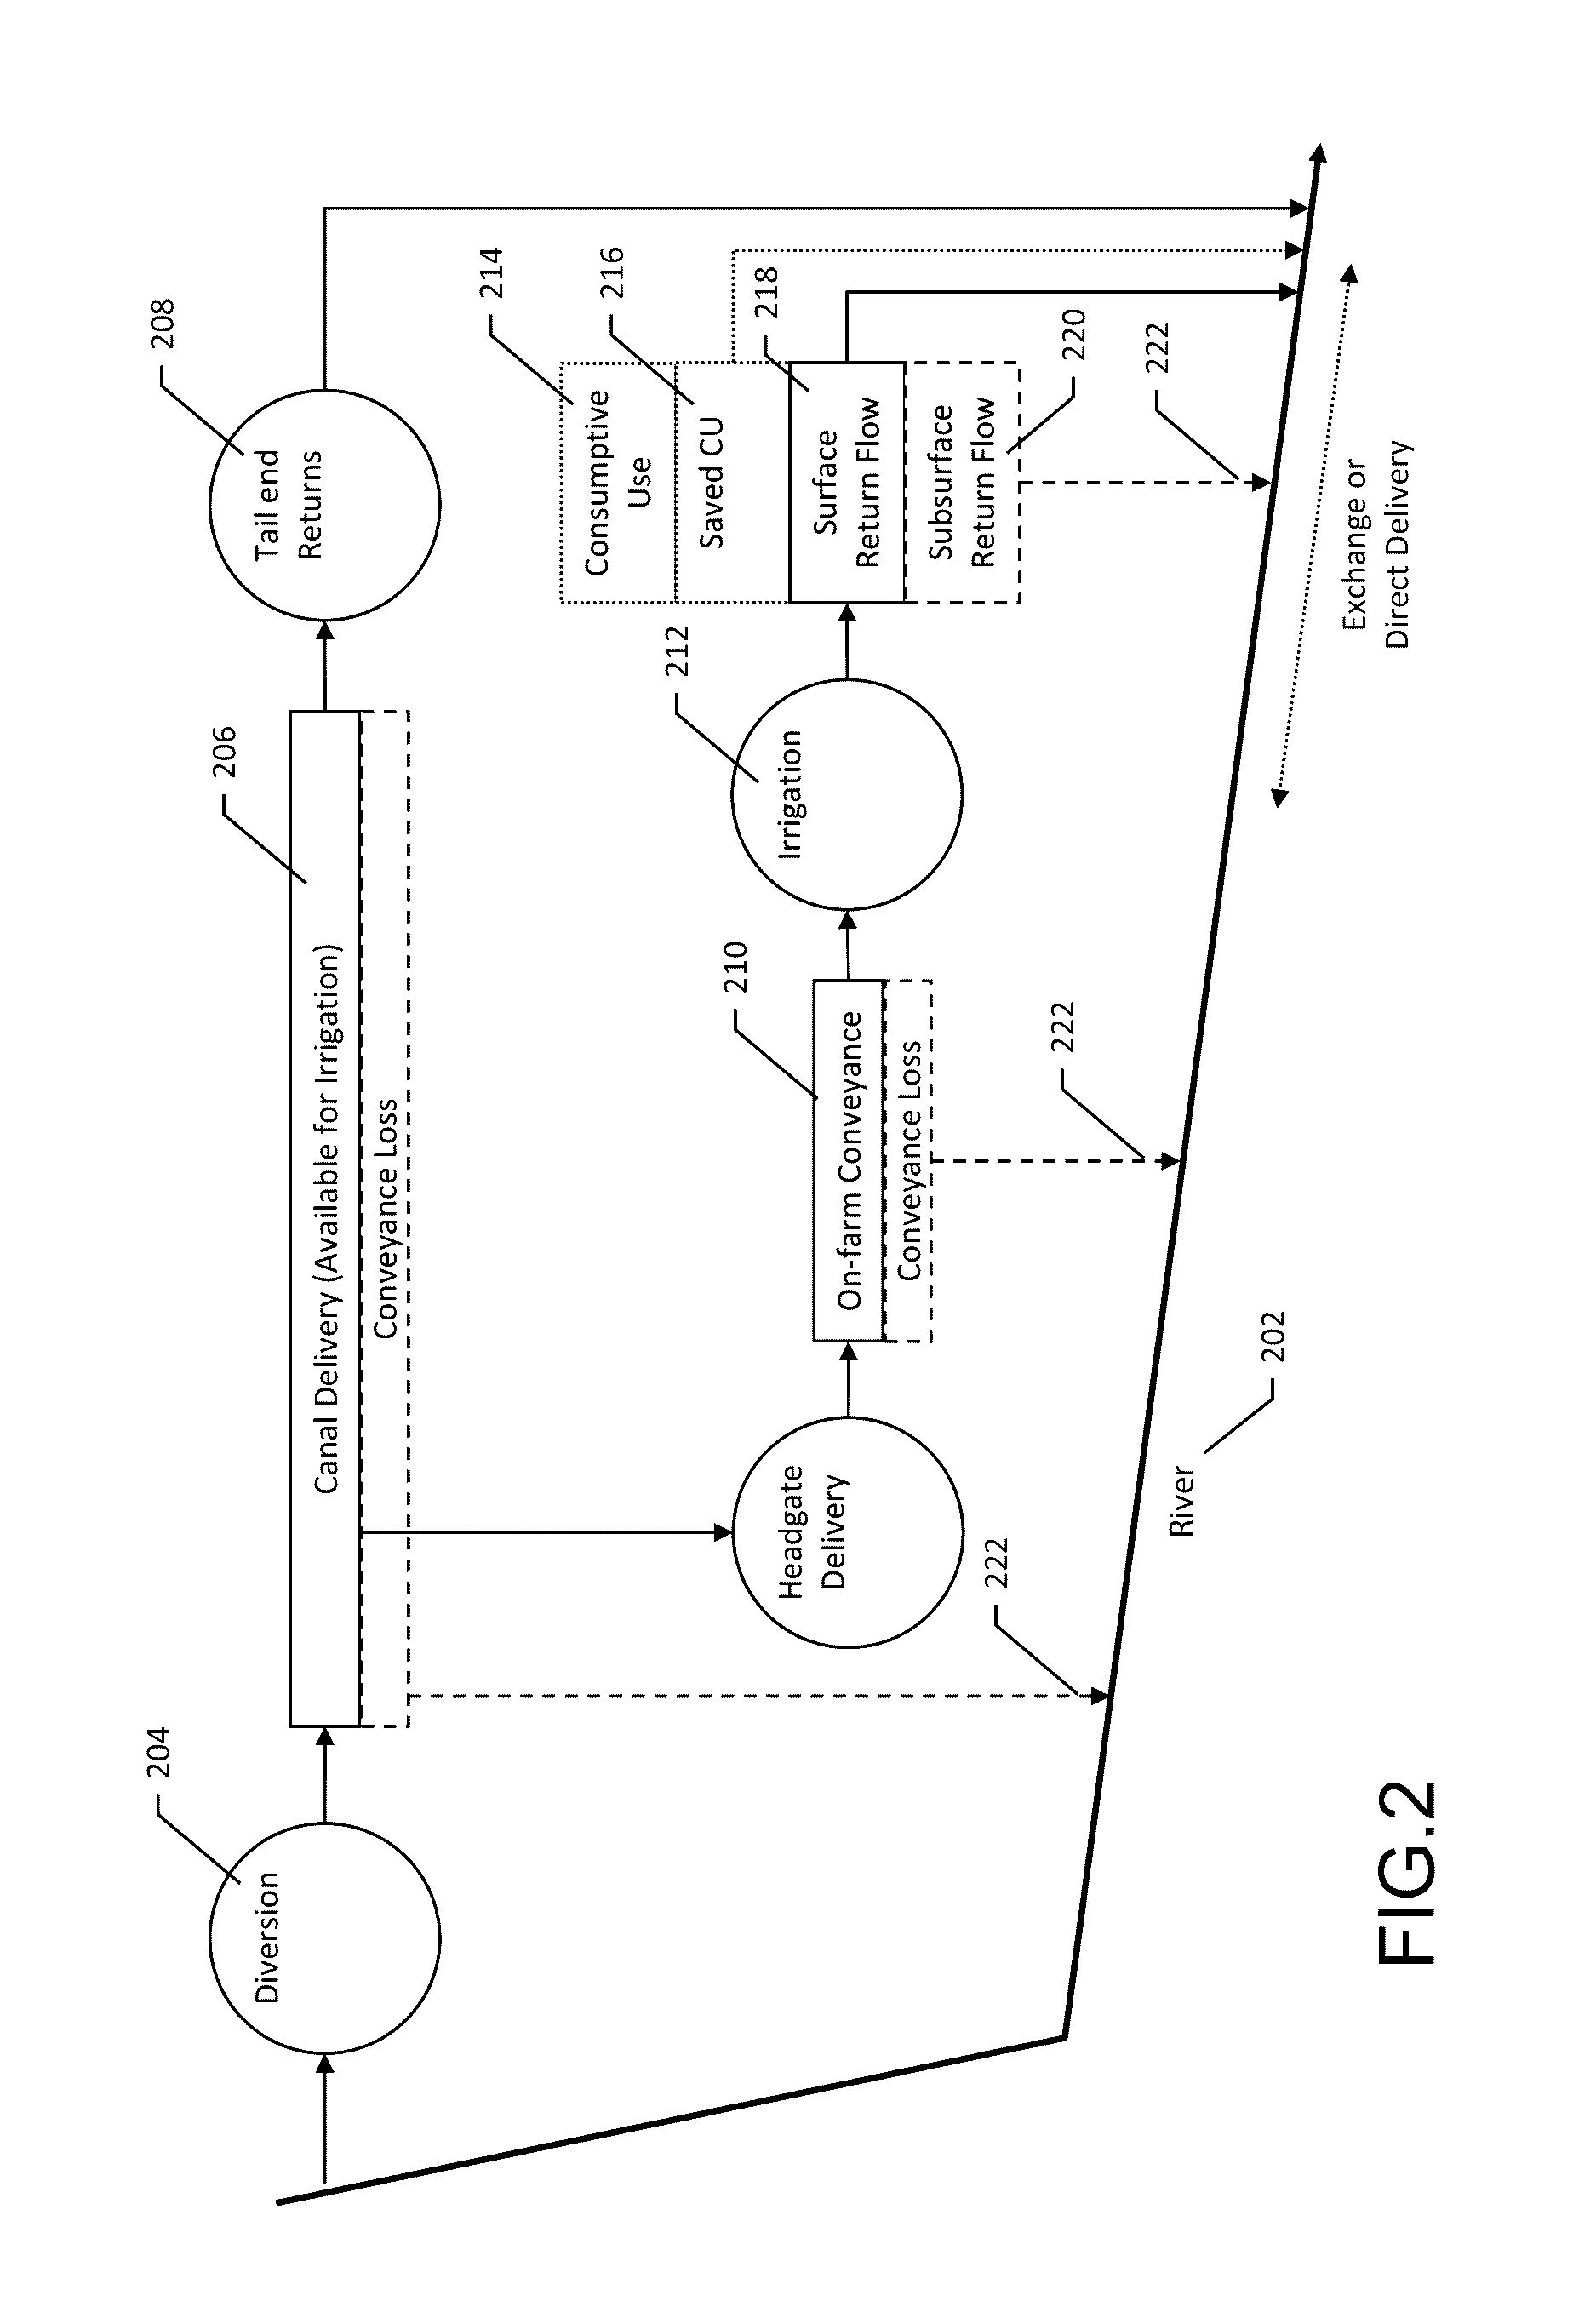 System and method for conserving water and optimizing land and water use